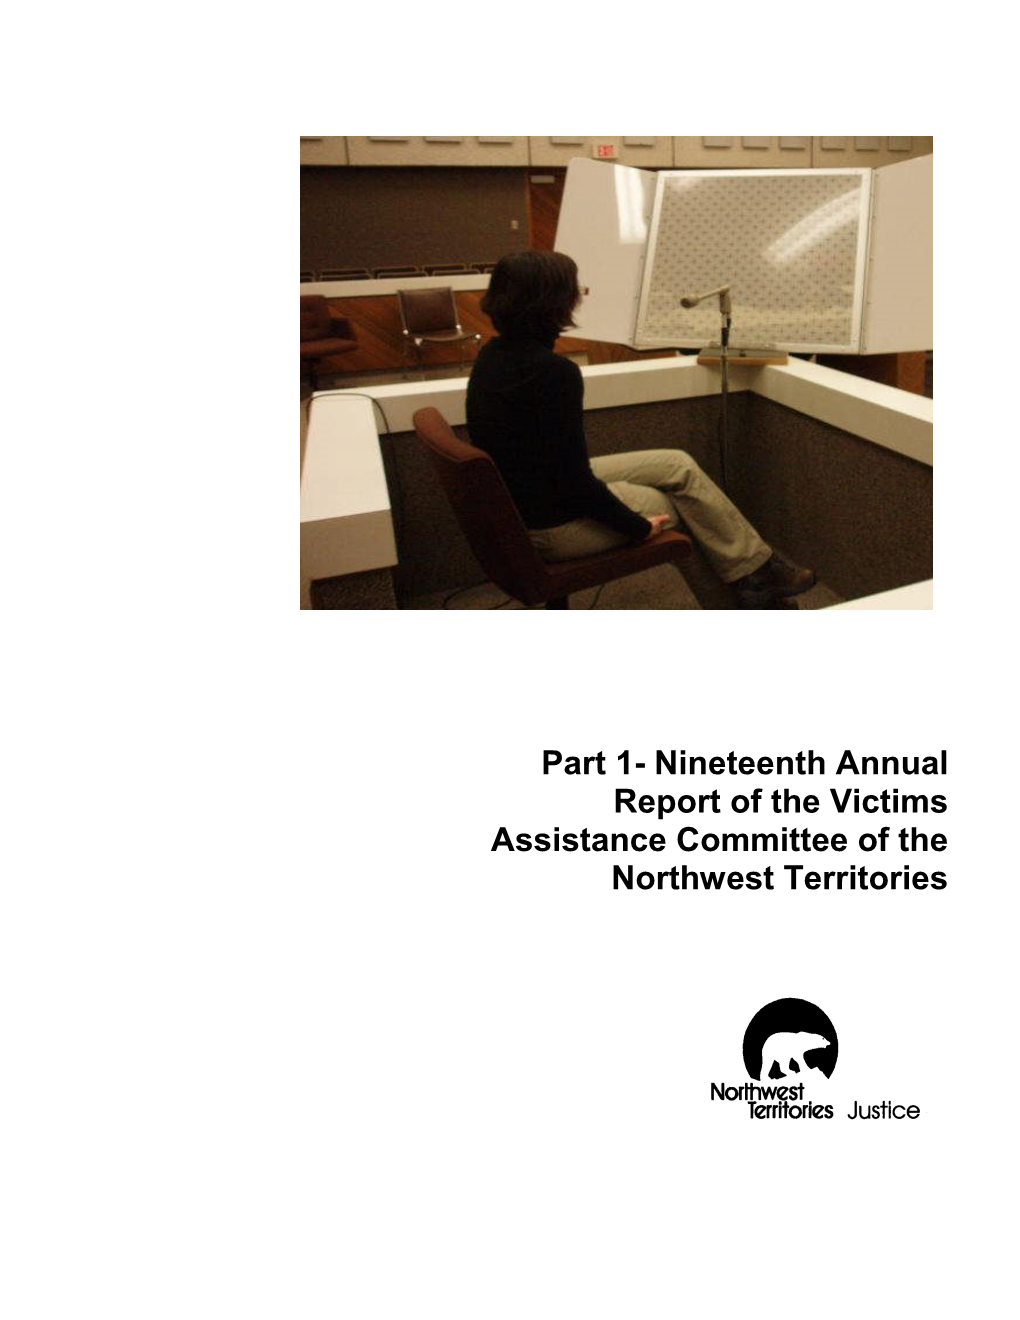 Nineteenth Annual Report of the Victims Assistance Committee of the Northwest Territories May 12, 2008